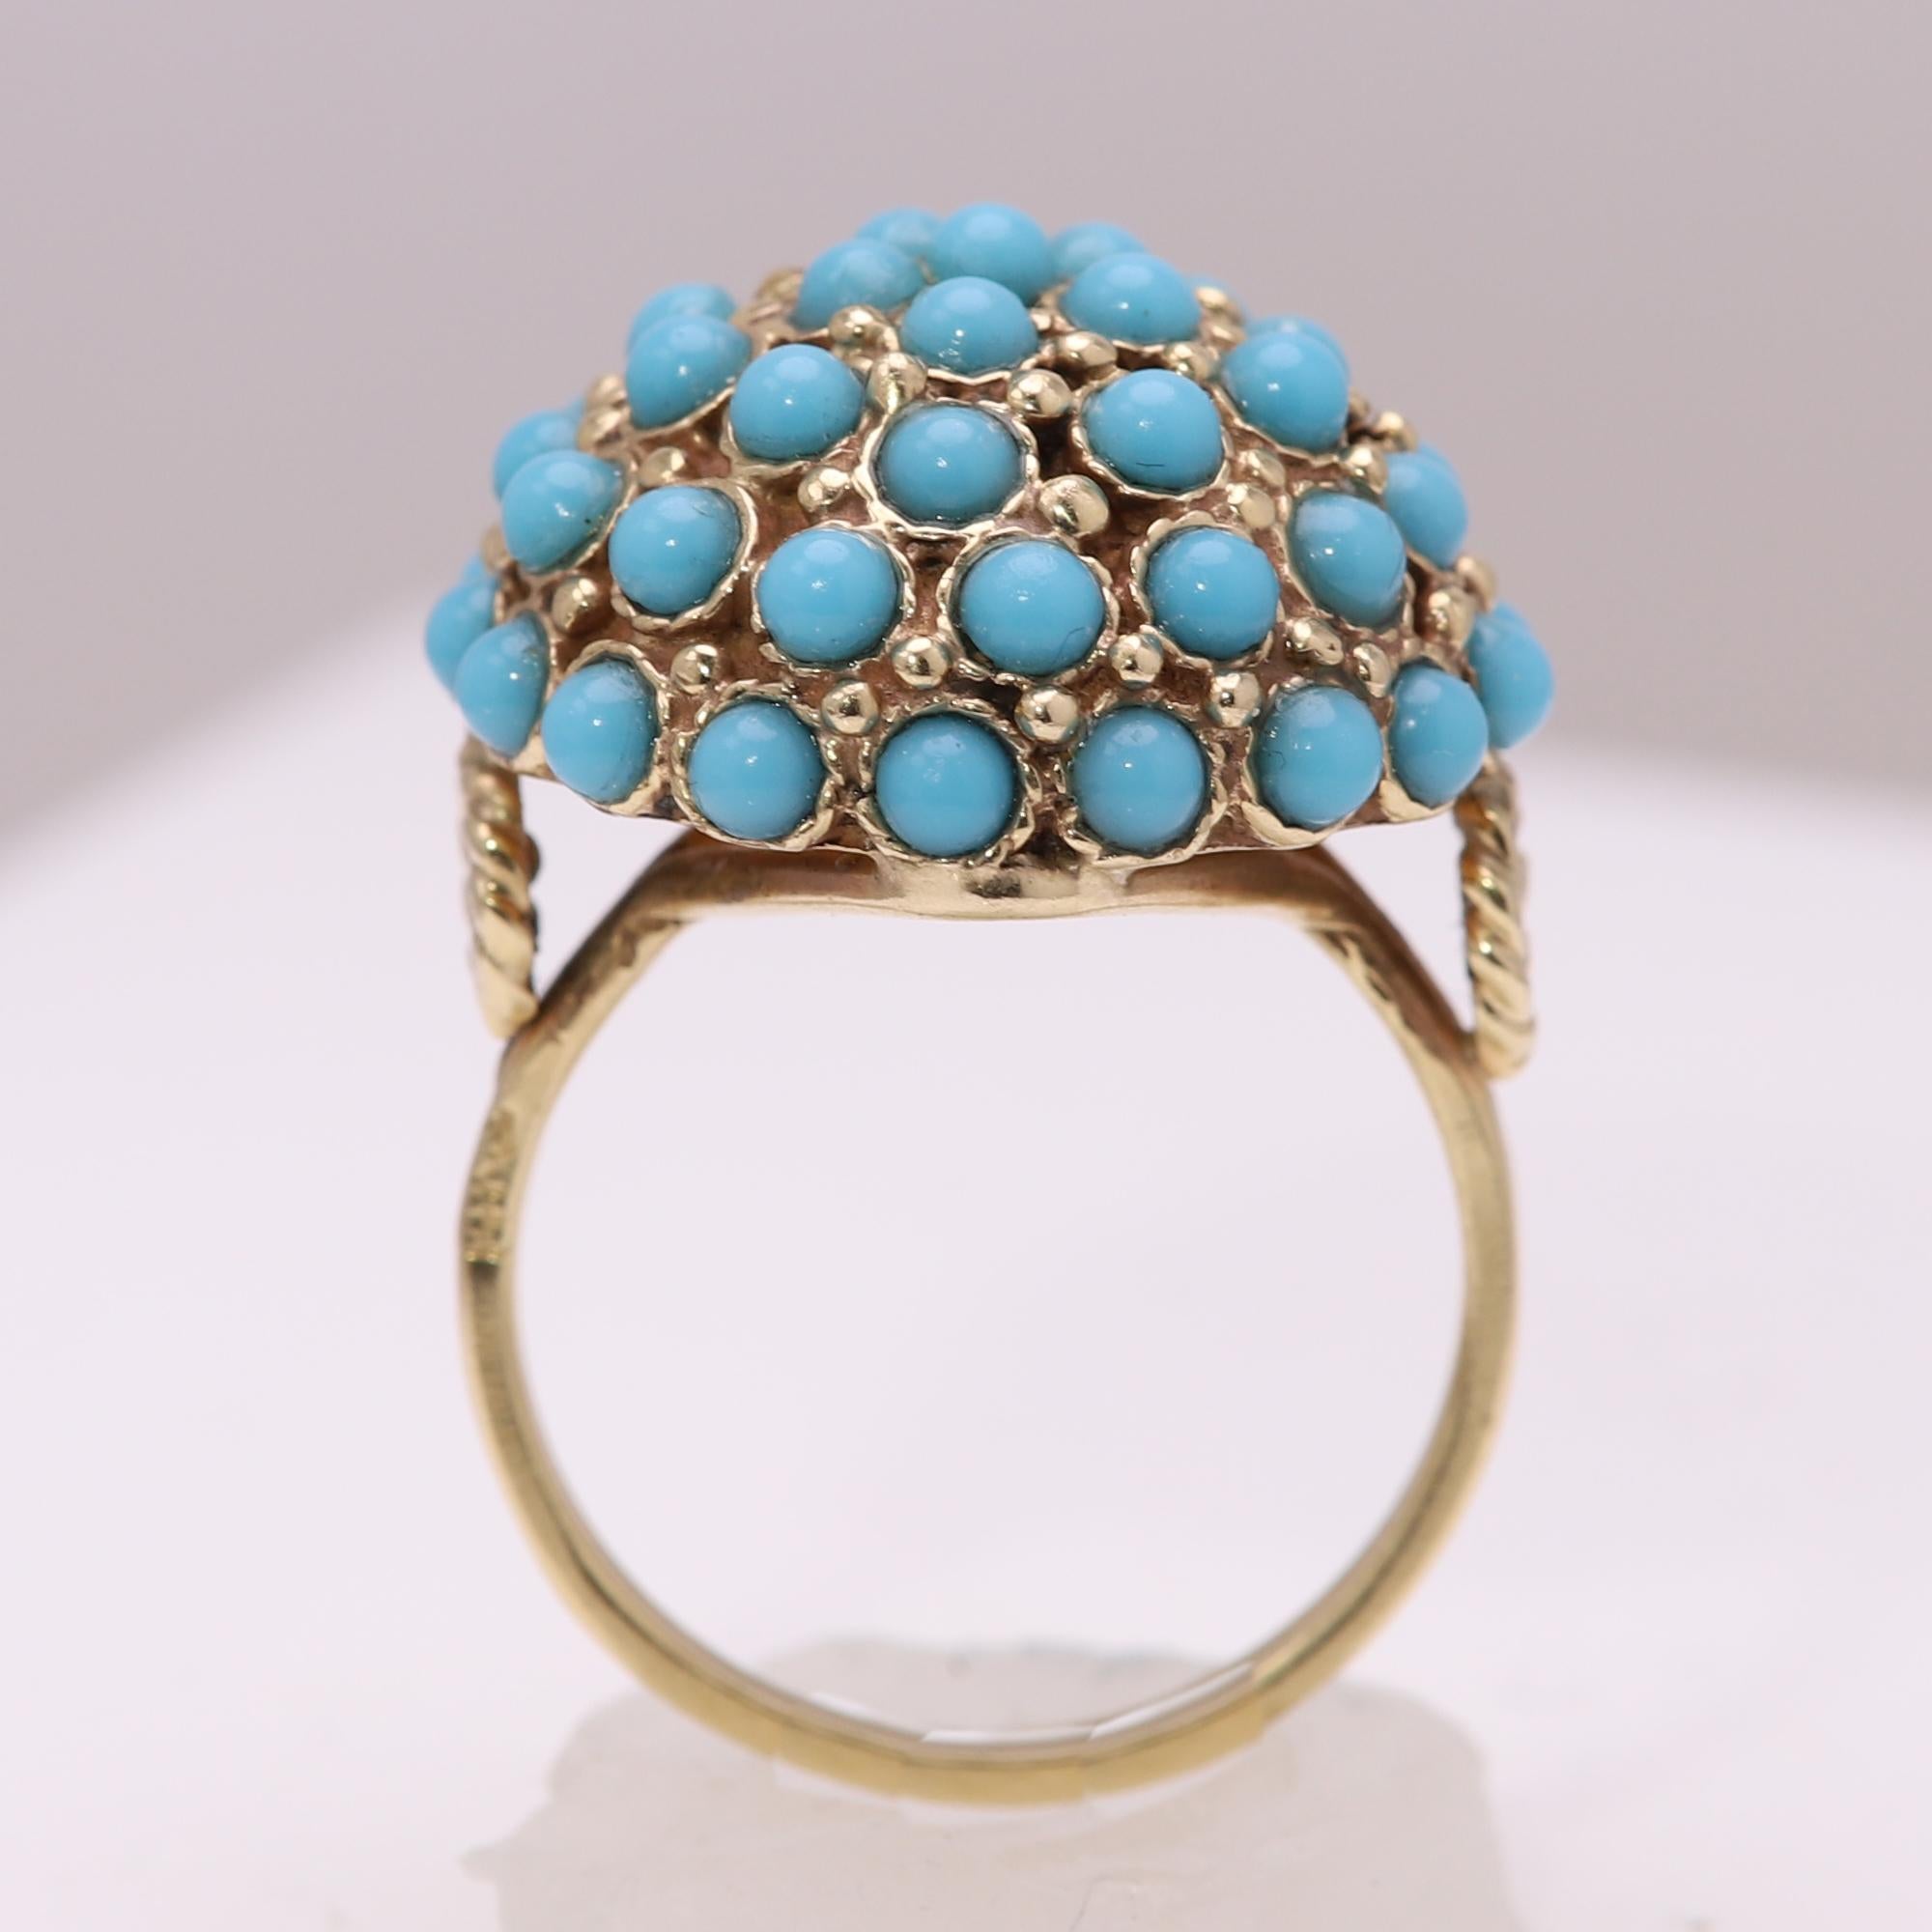 Antique Turquoise Ring 14 Karat Yellow Gold Cluster Design Persian Turquoise For Sale 2